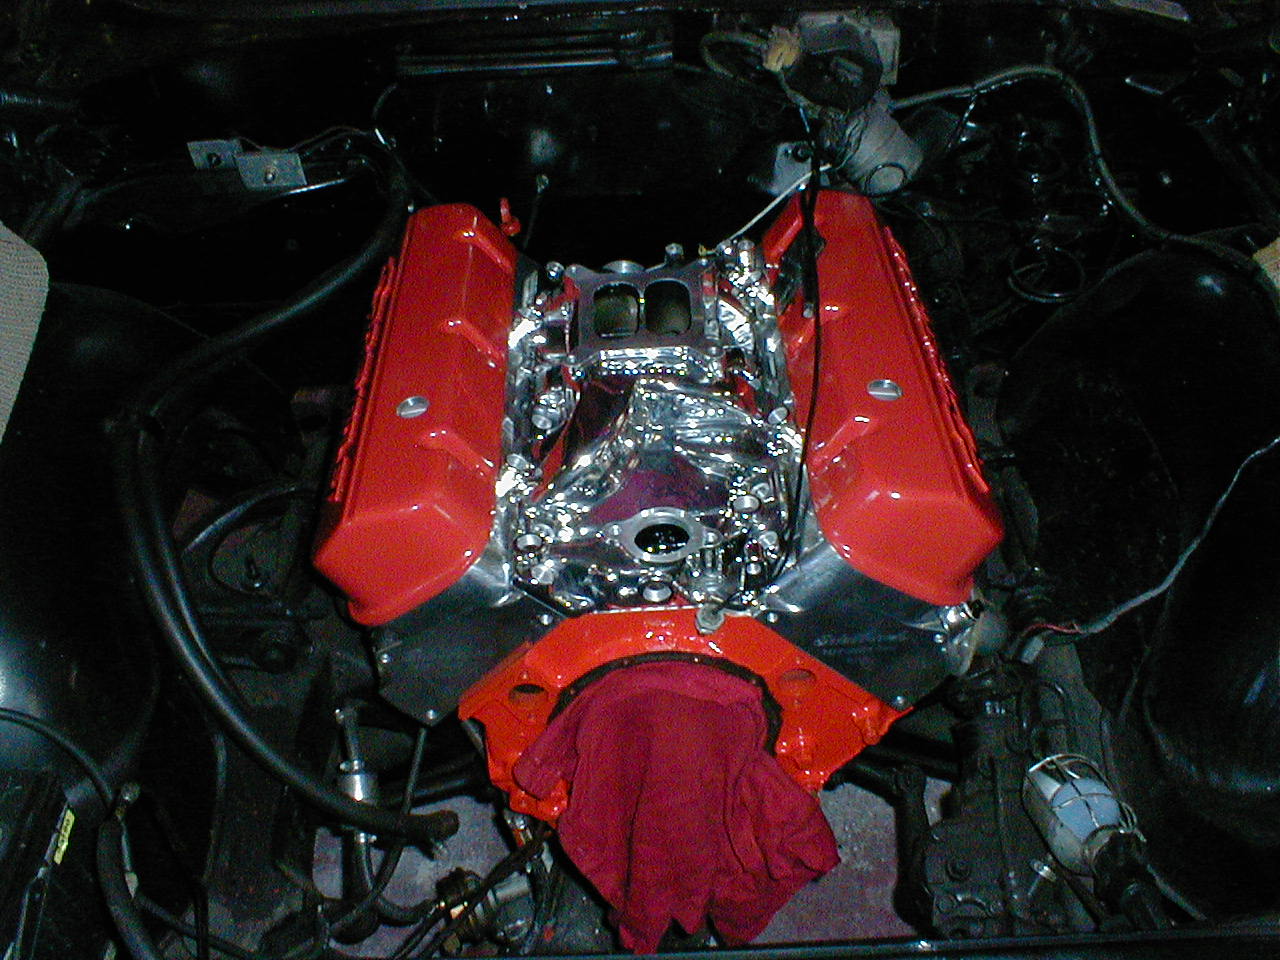 during the engine build